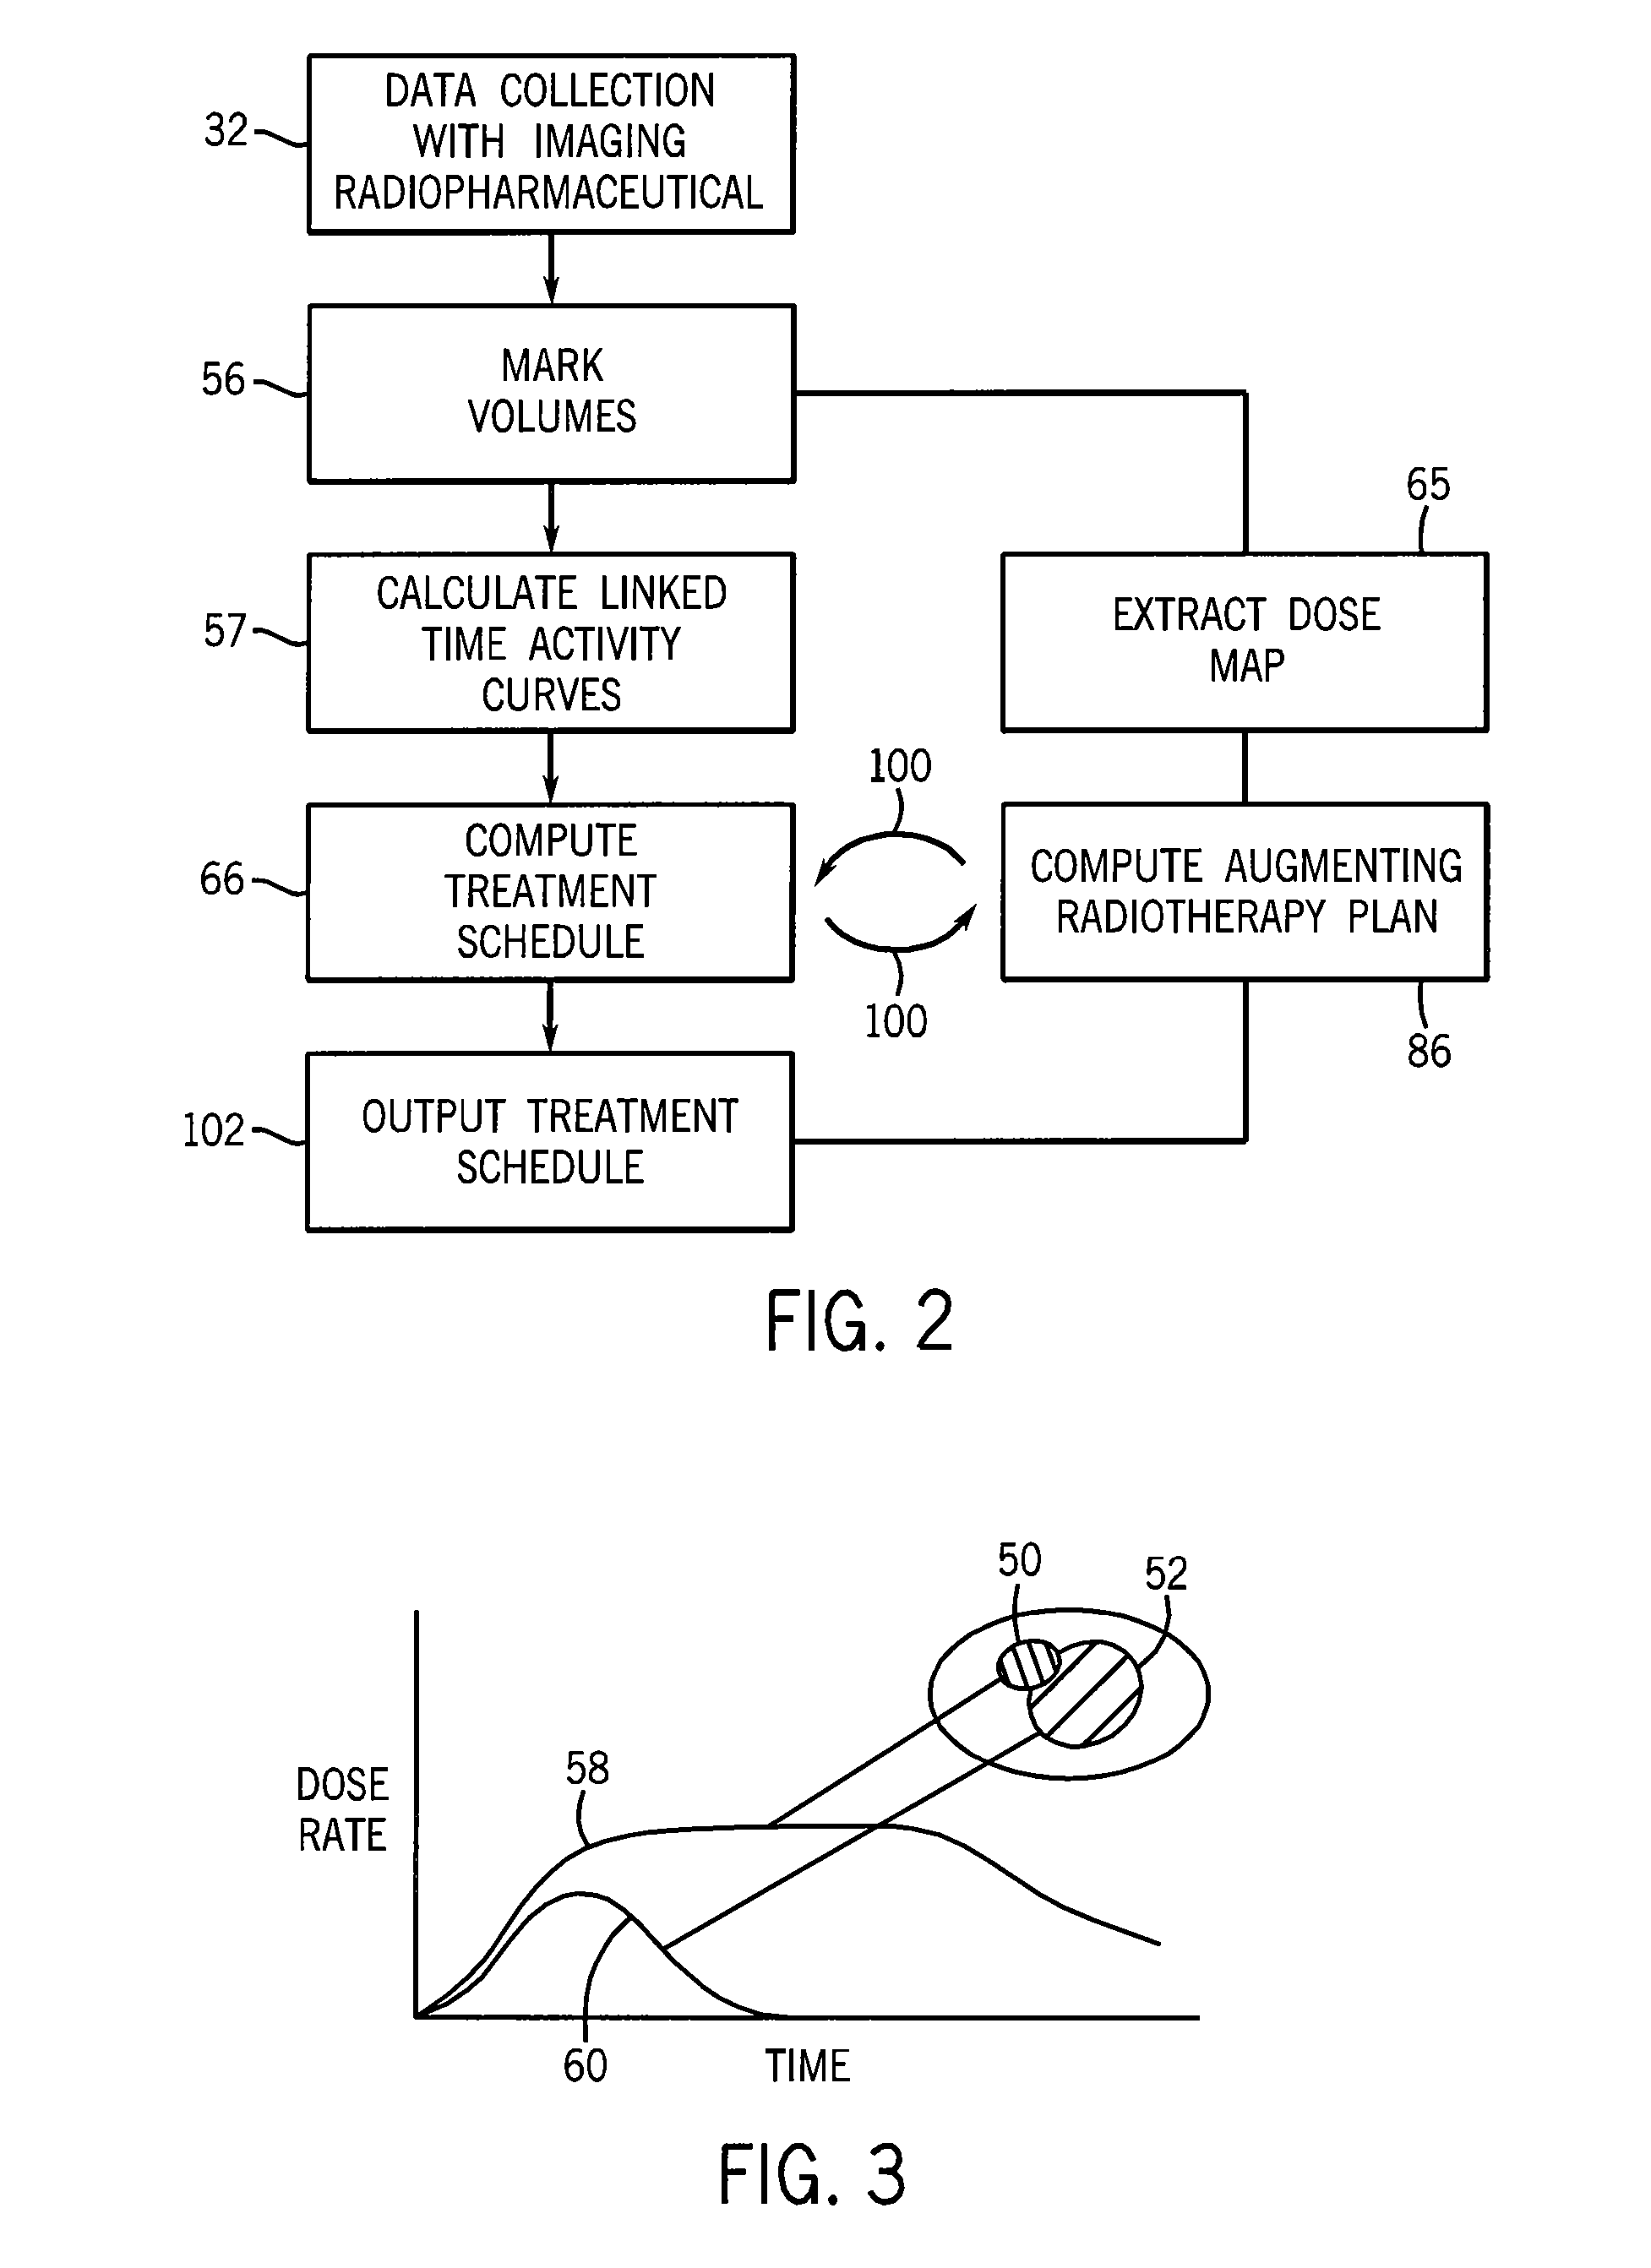 Treatment Planning System For Radiopharmaceuticals